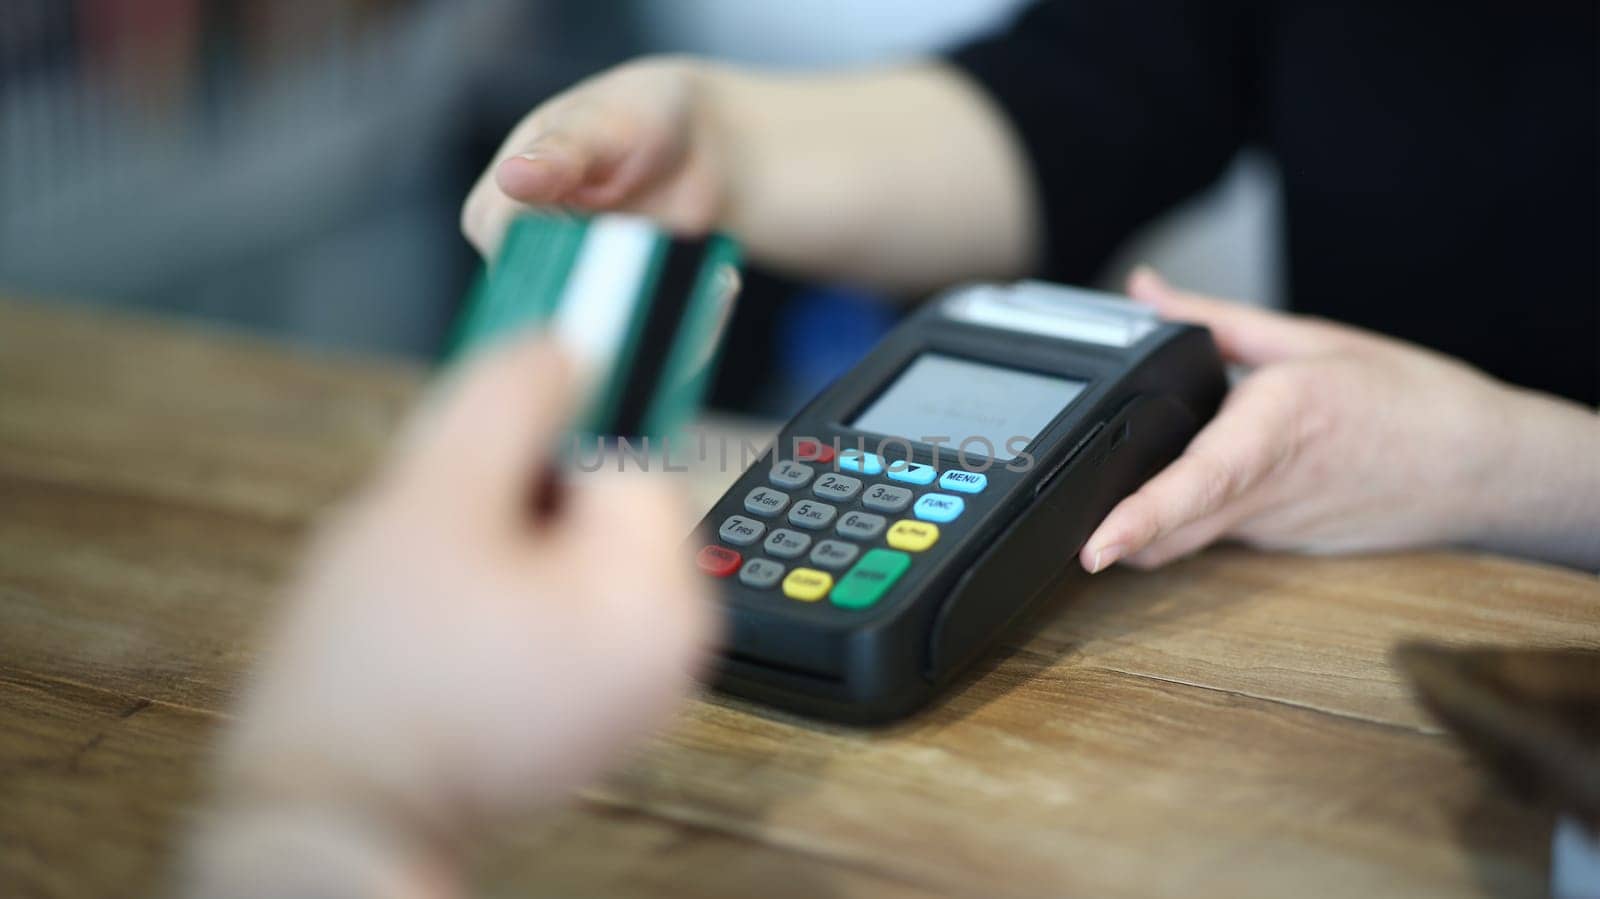 Cashier Hand Taking Plastic Credit Card to Payment. Electronic Money Transaction via Bank Terminal. Commerce Machine for Online Financial Operation. Using Technology Device Close-up Photography